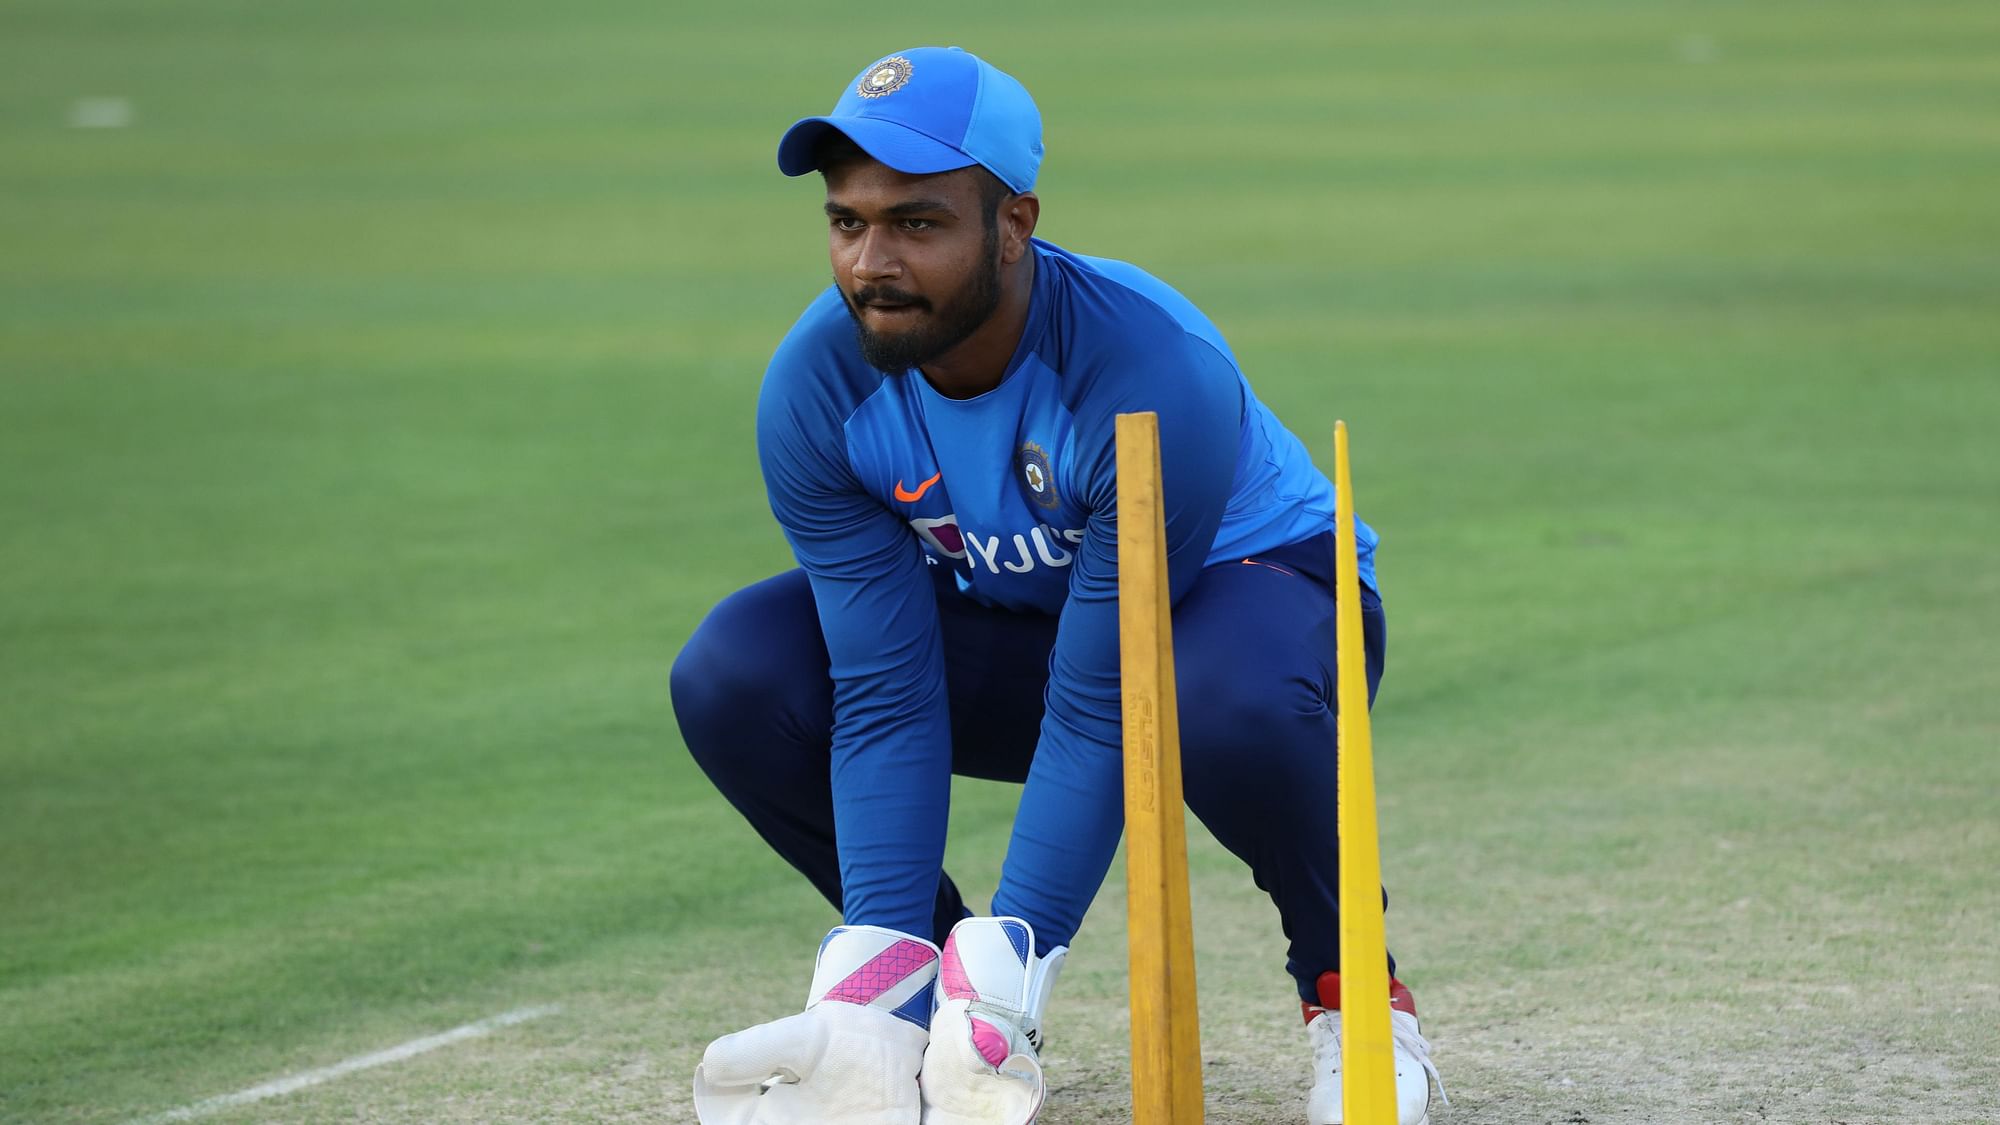 Open to Keeping Wickets, Team is Priority' Says Sanju Samson